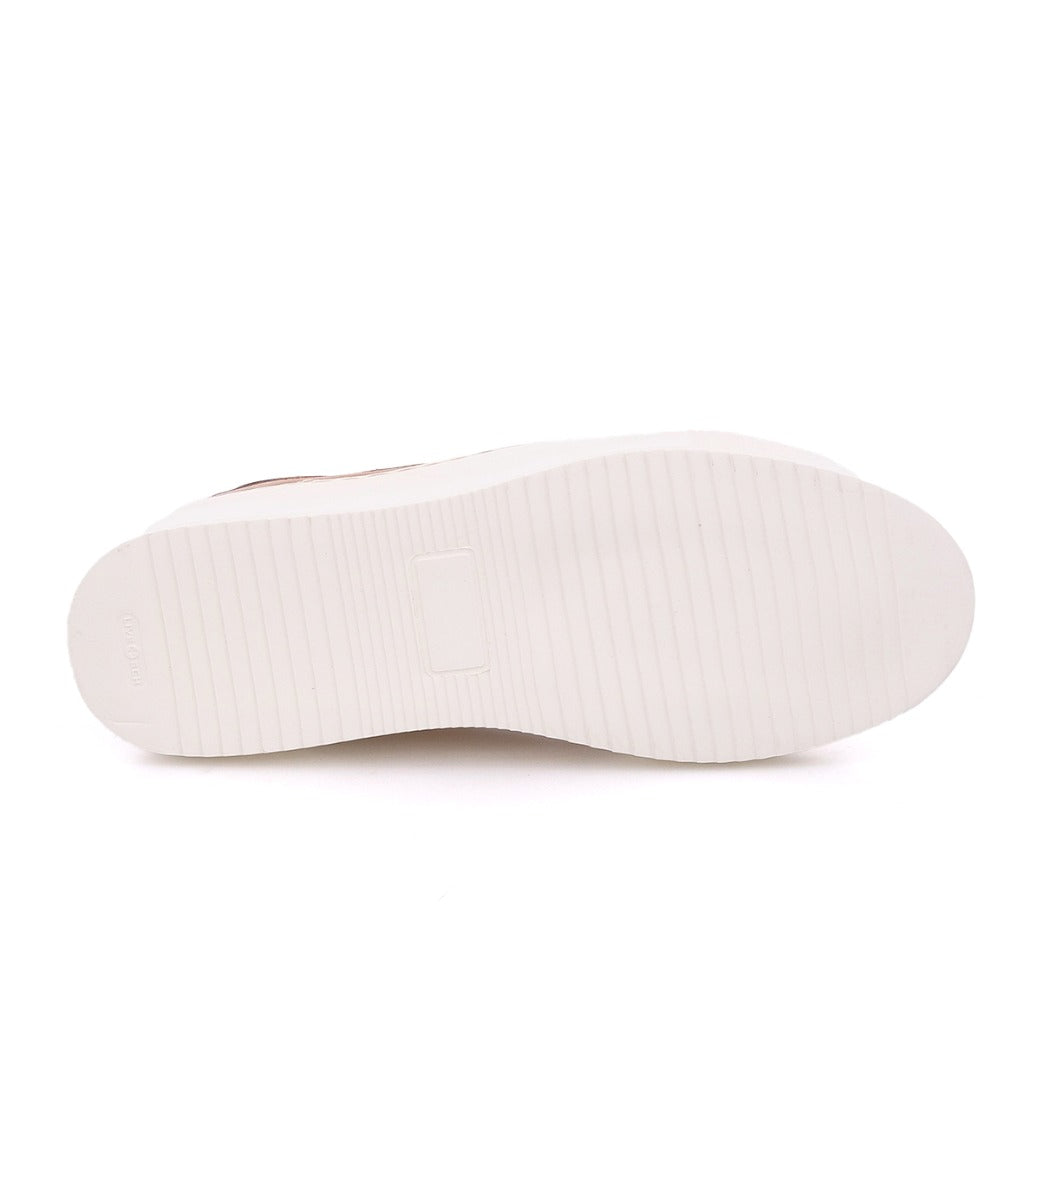 A white Azeli sneaker with white soles on a white background. (Bed Stu)